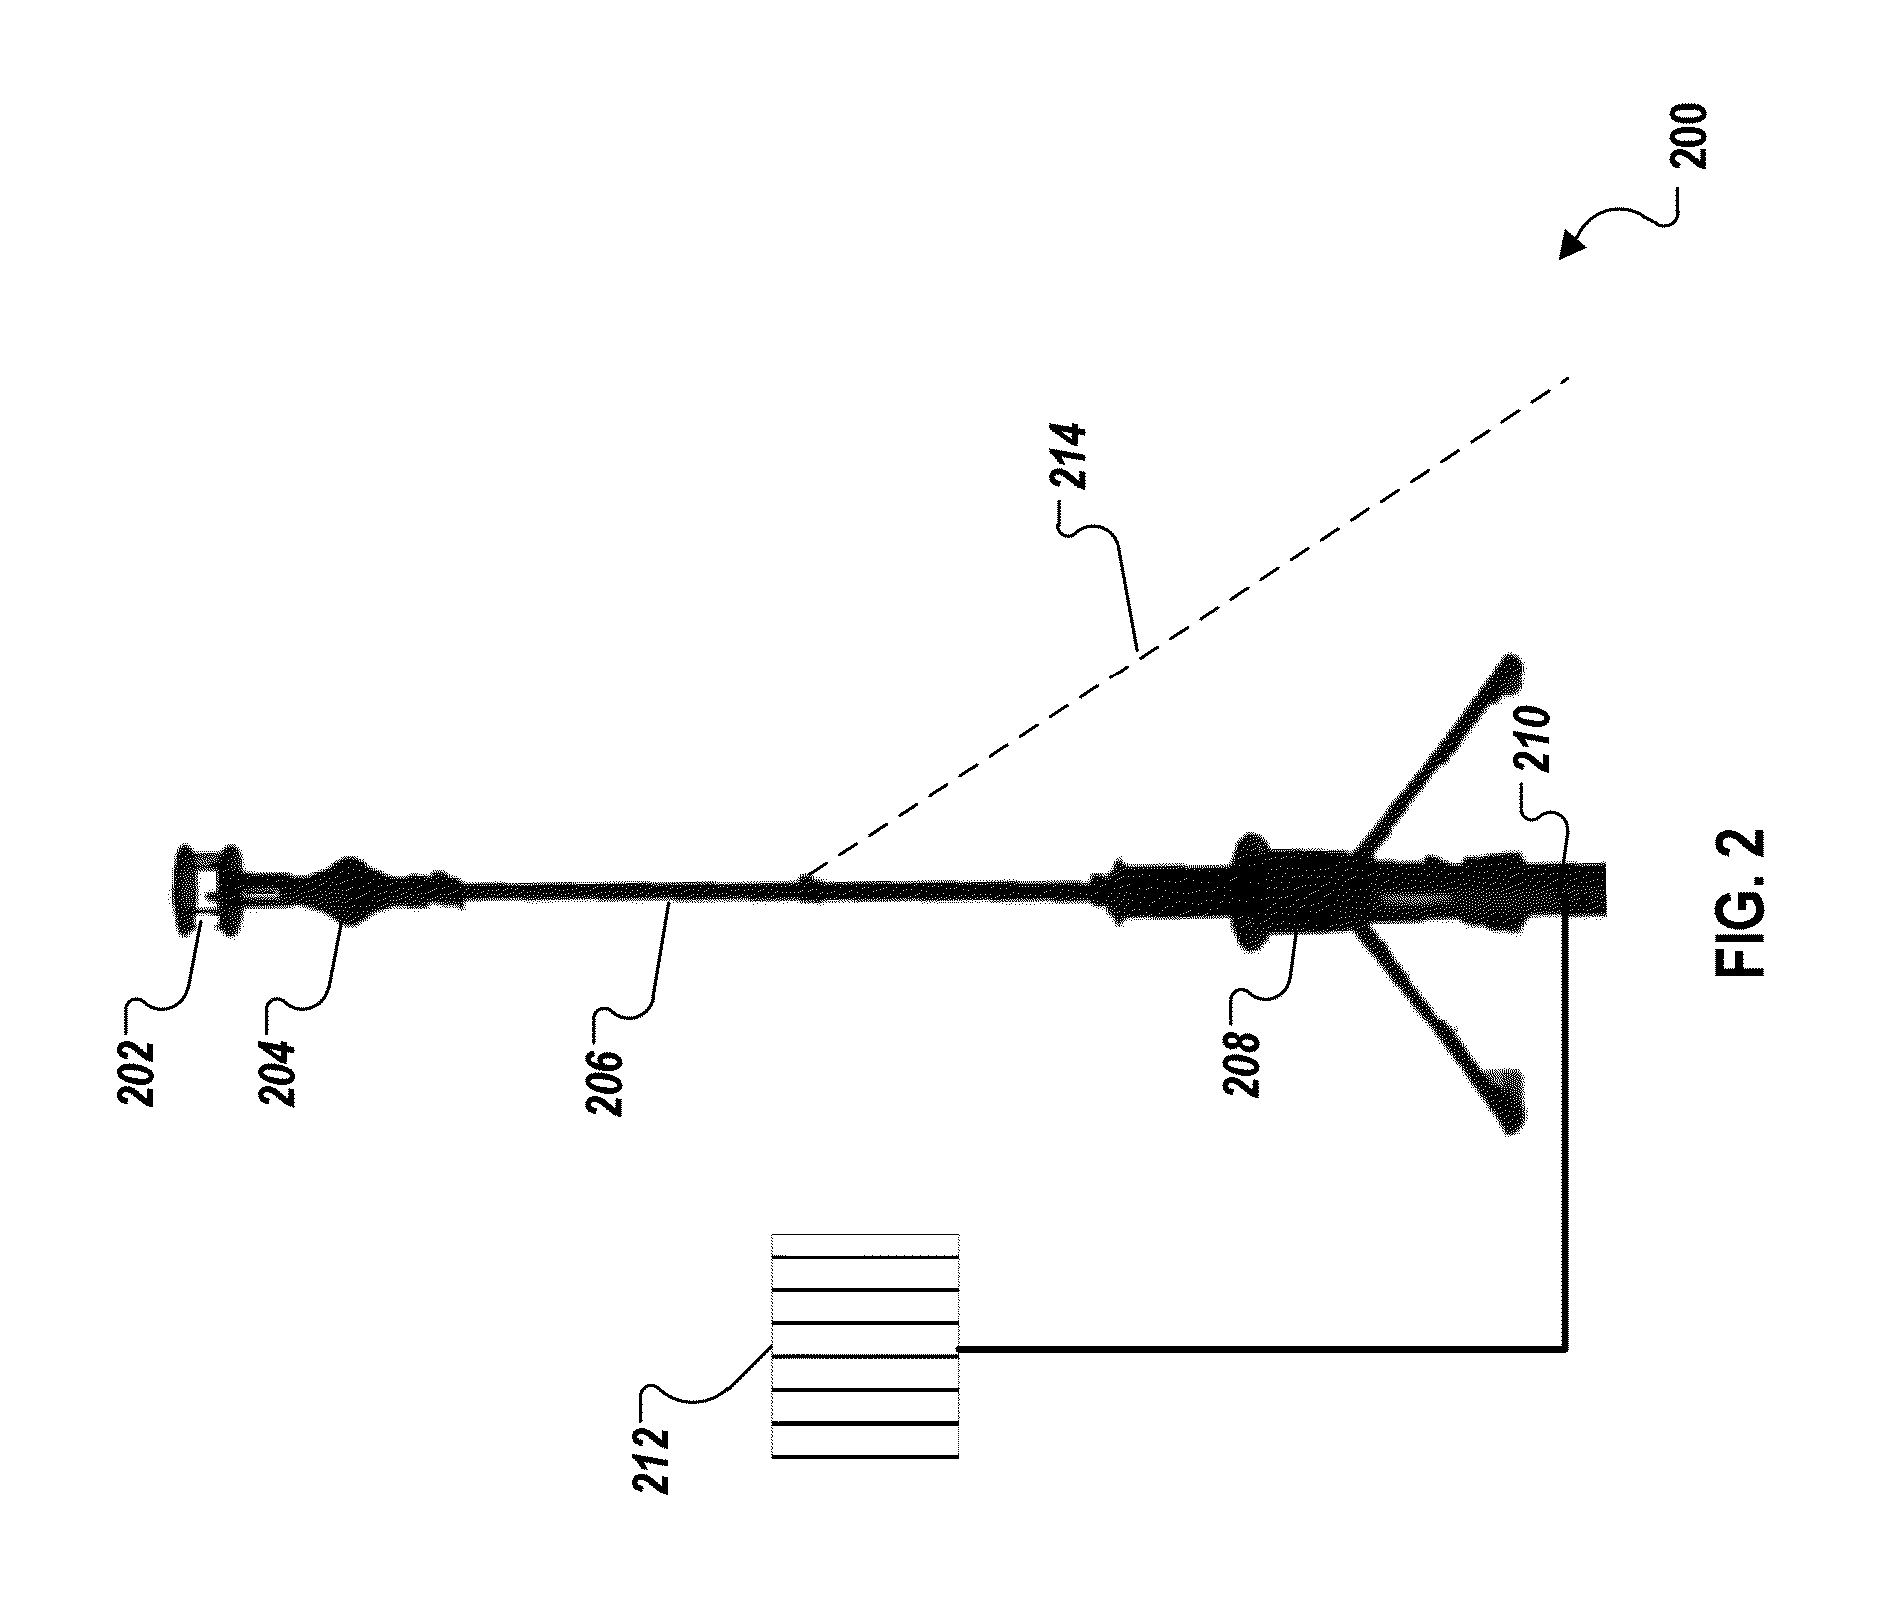 Networked anemometer system for windmeasurement